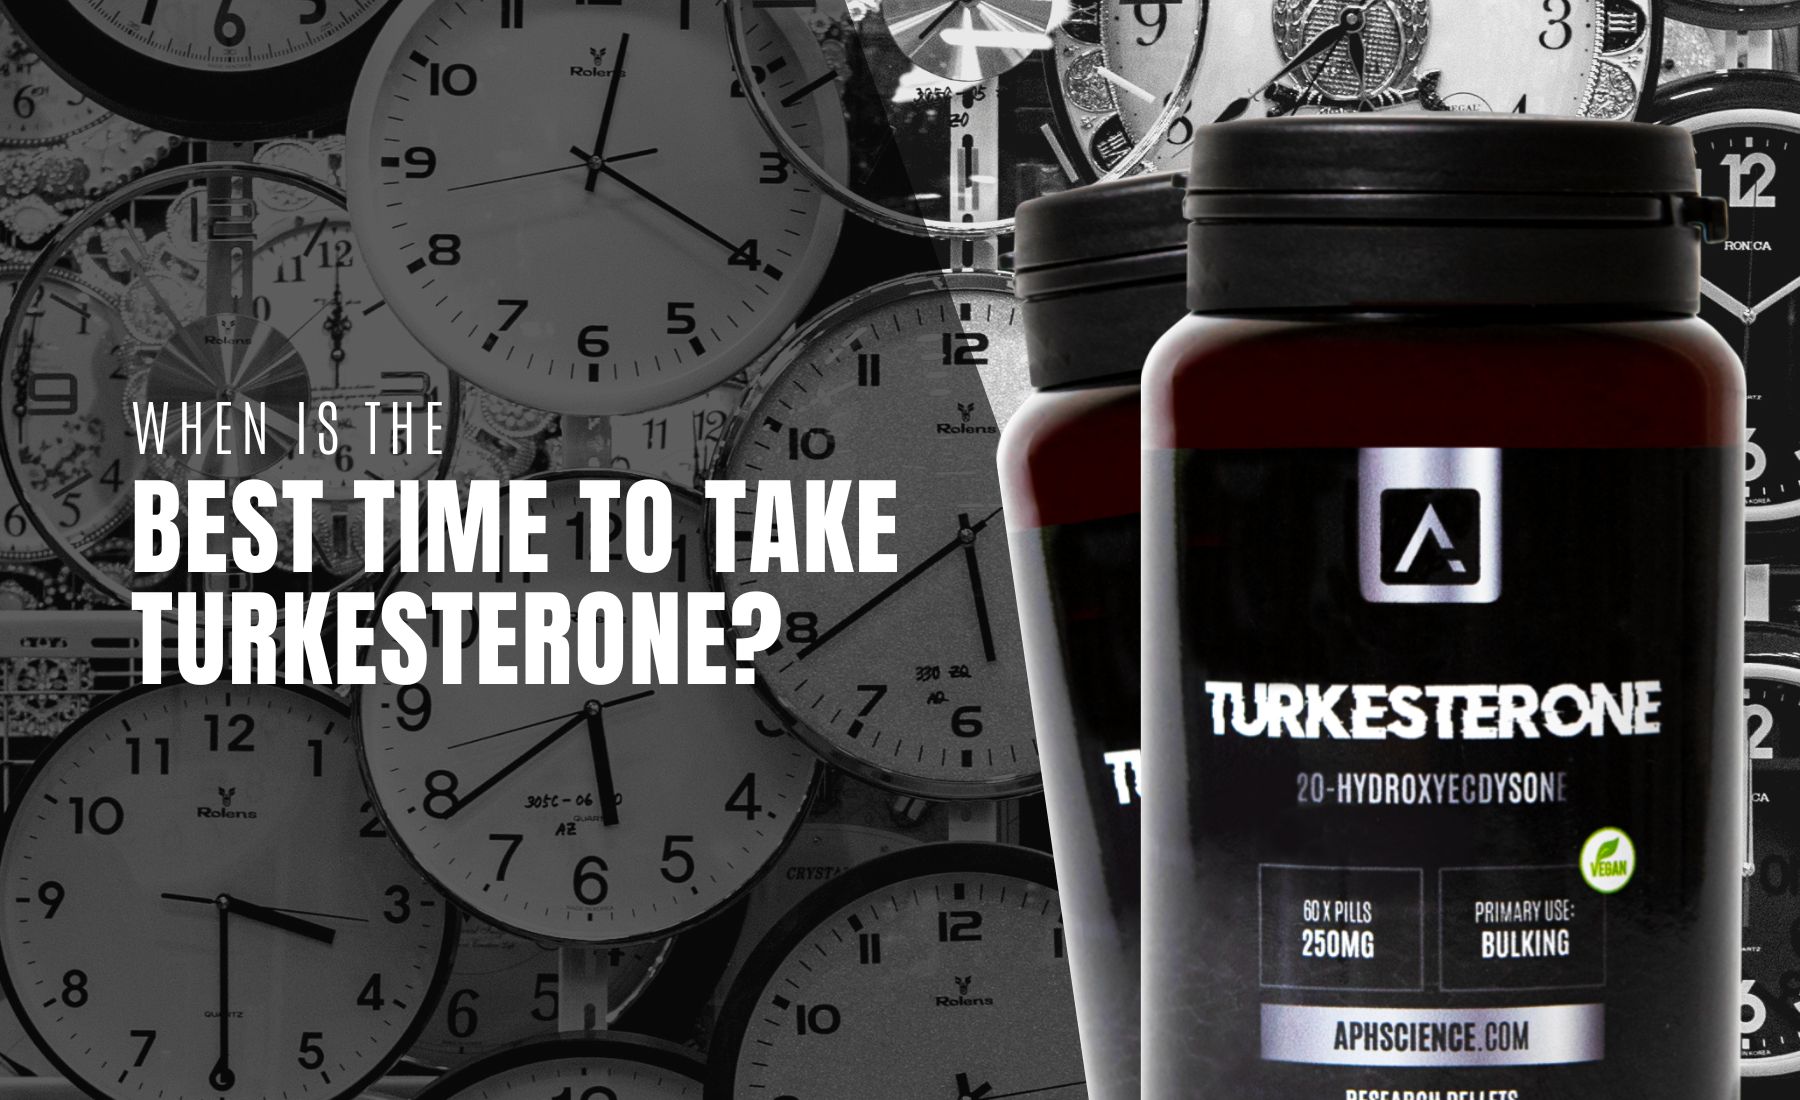 When is the Best Time to Take Turkesterone?